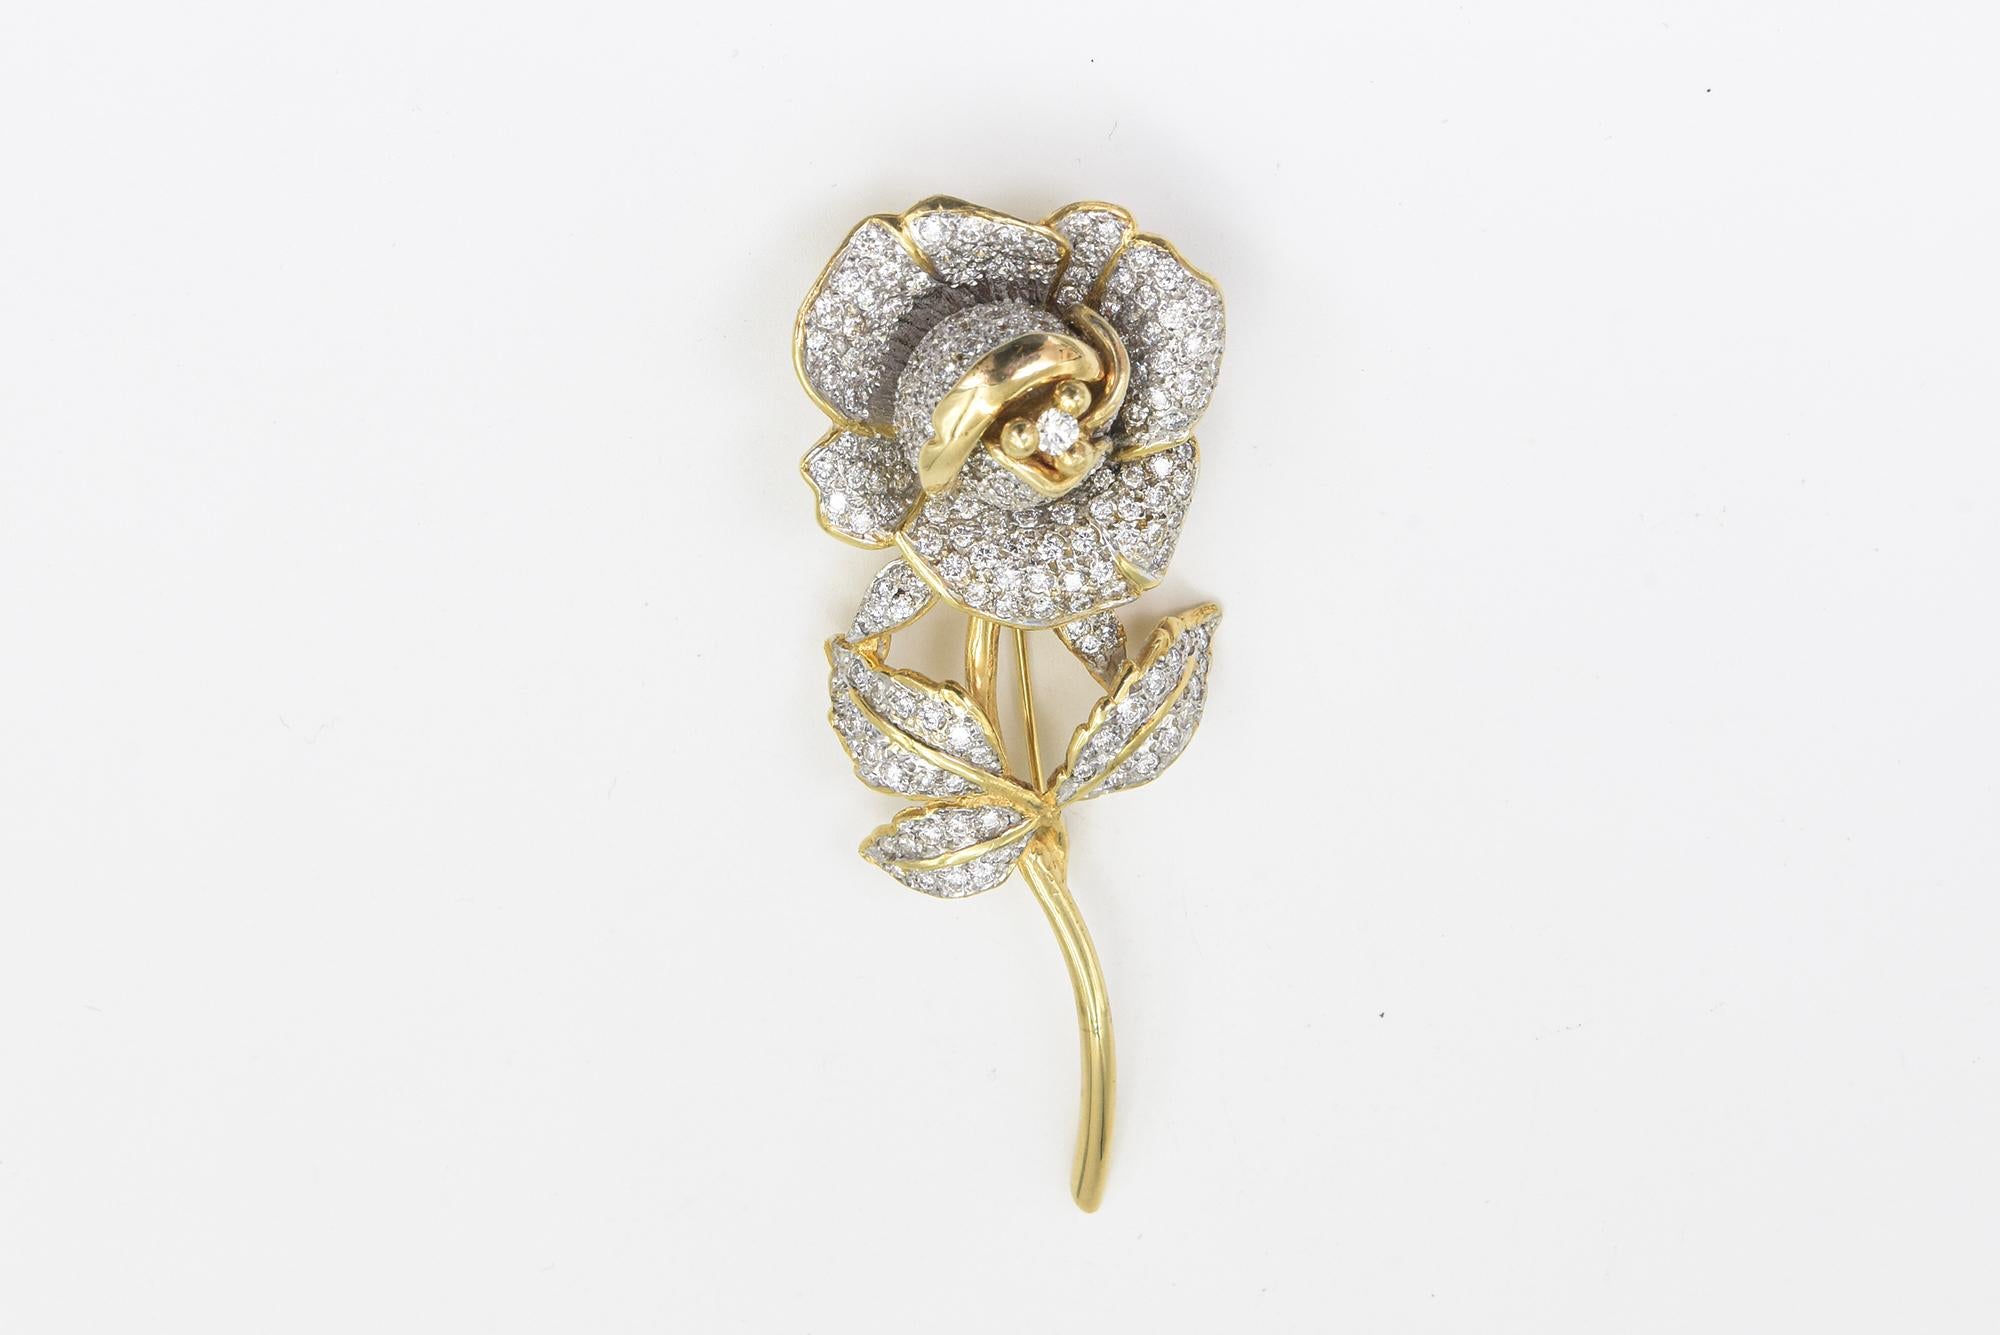 We have 2 of these beautiful custom made pave diamond rose brooches.  They can be purchased as a pair or individually.  They are 14k yellow gold with 4.58 carats of diamonds in each one.  Price listed below is for the pair, but they can also be